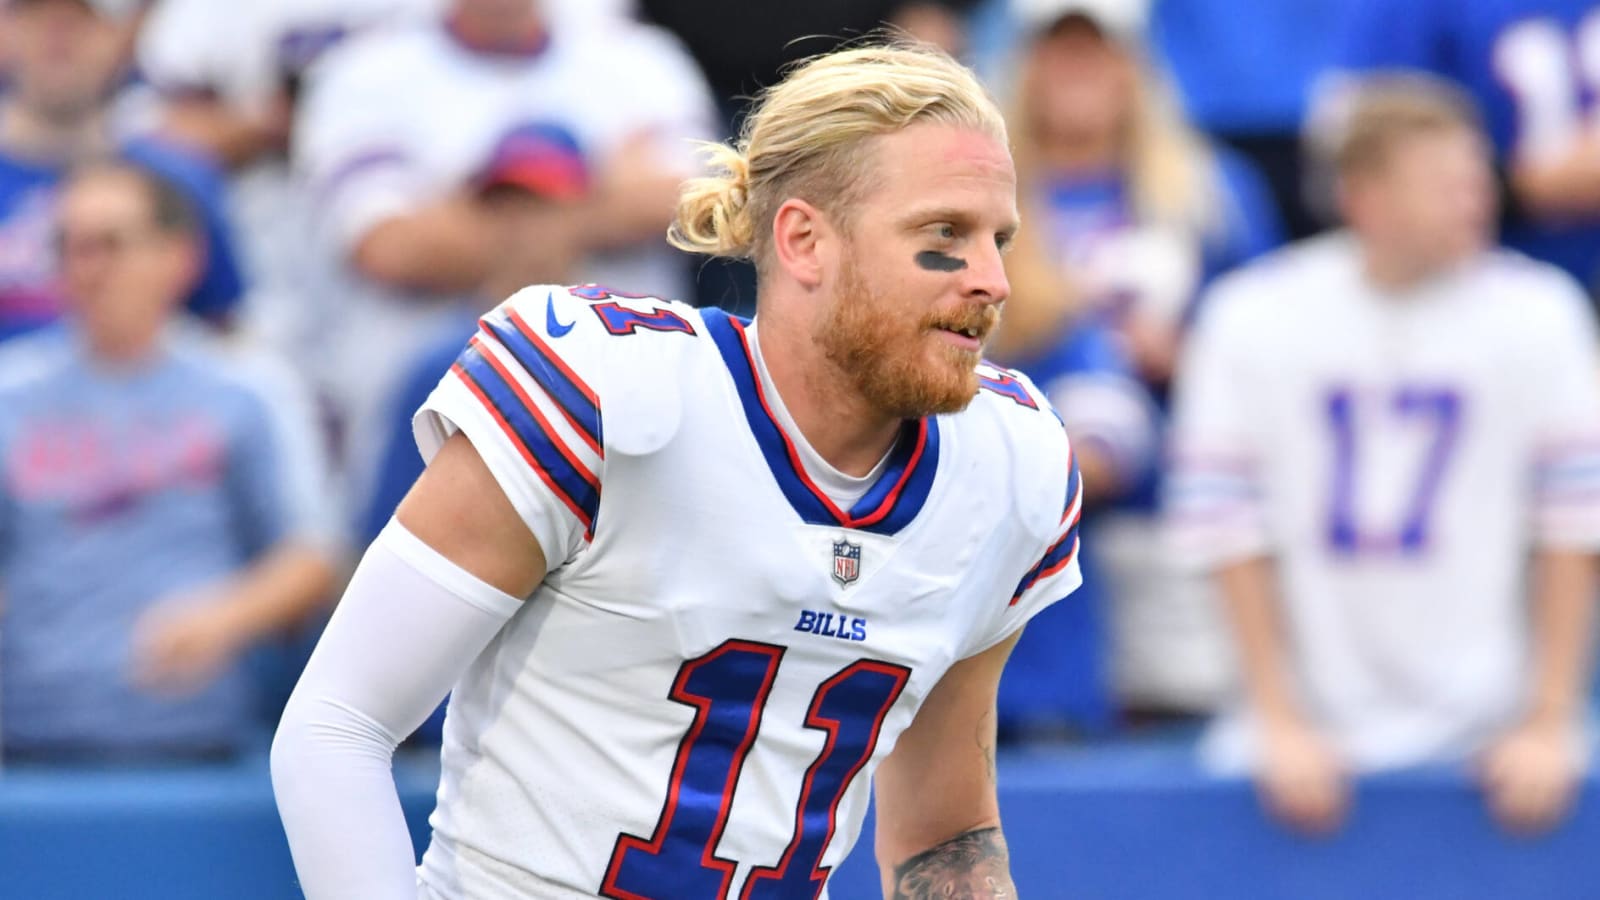 Cole Beasley would be a very intriguing option for Green Bay